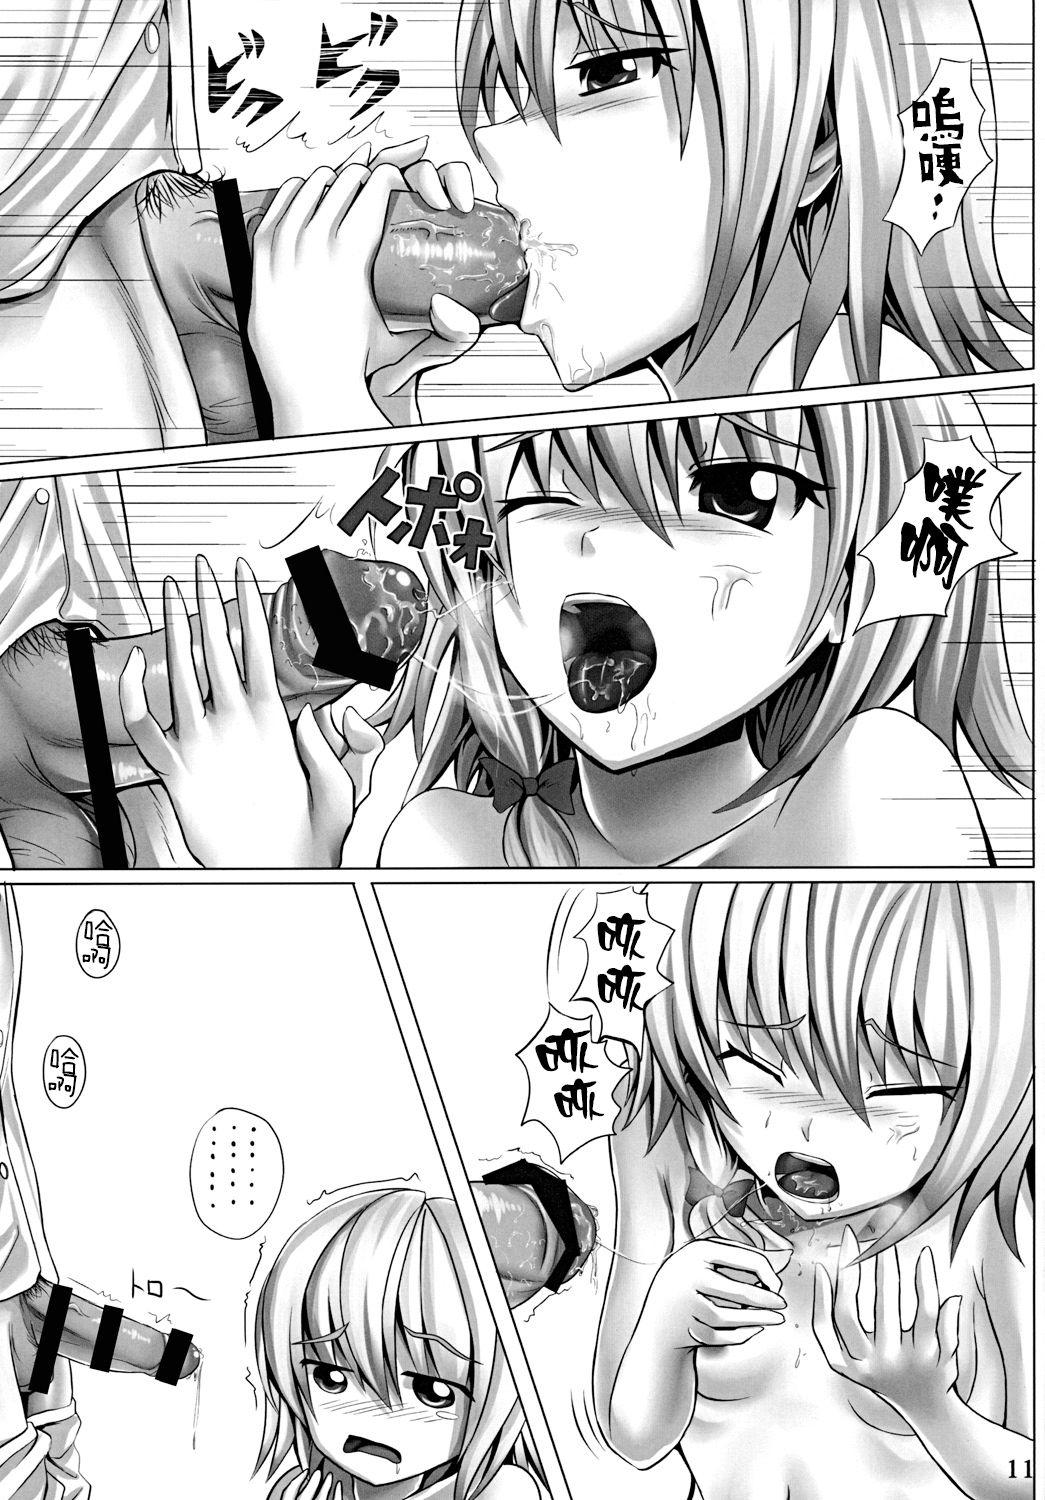 Exhibition Mahou no Yoru - Touhou project Missionary Position Porn - Page 11